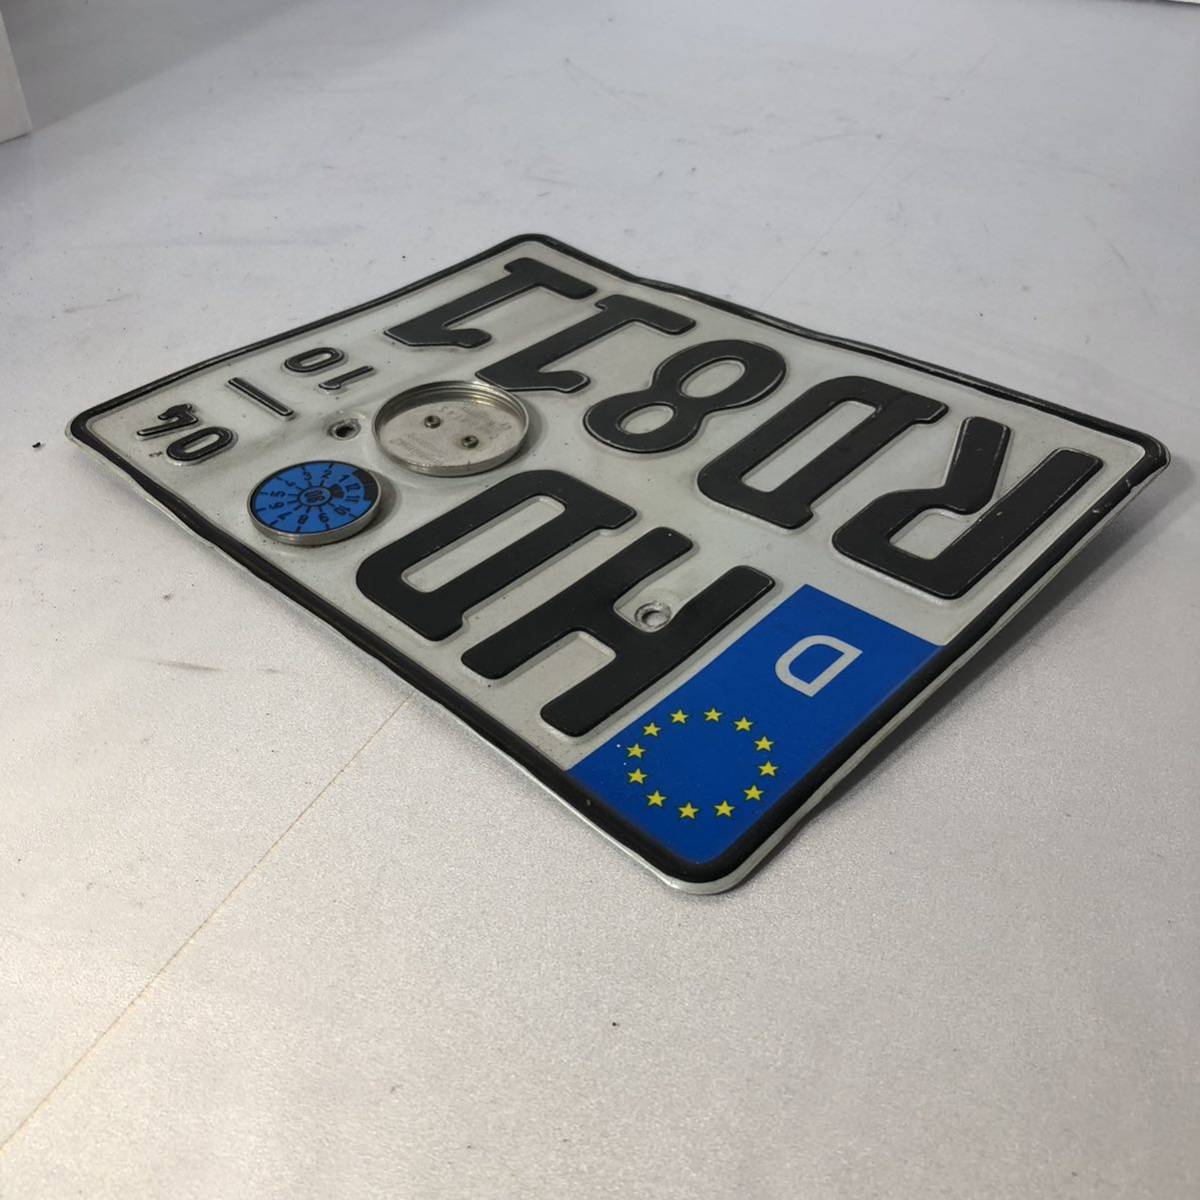 #201 HDRD811 number plate euro Europe Classic large bike old car out of print car .. remove interior retro free shipping!